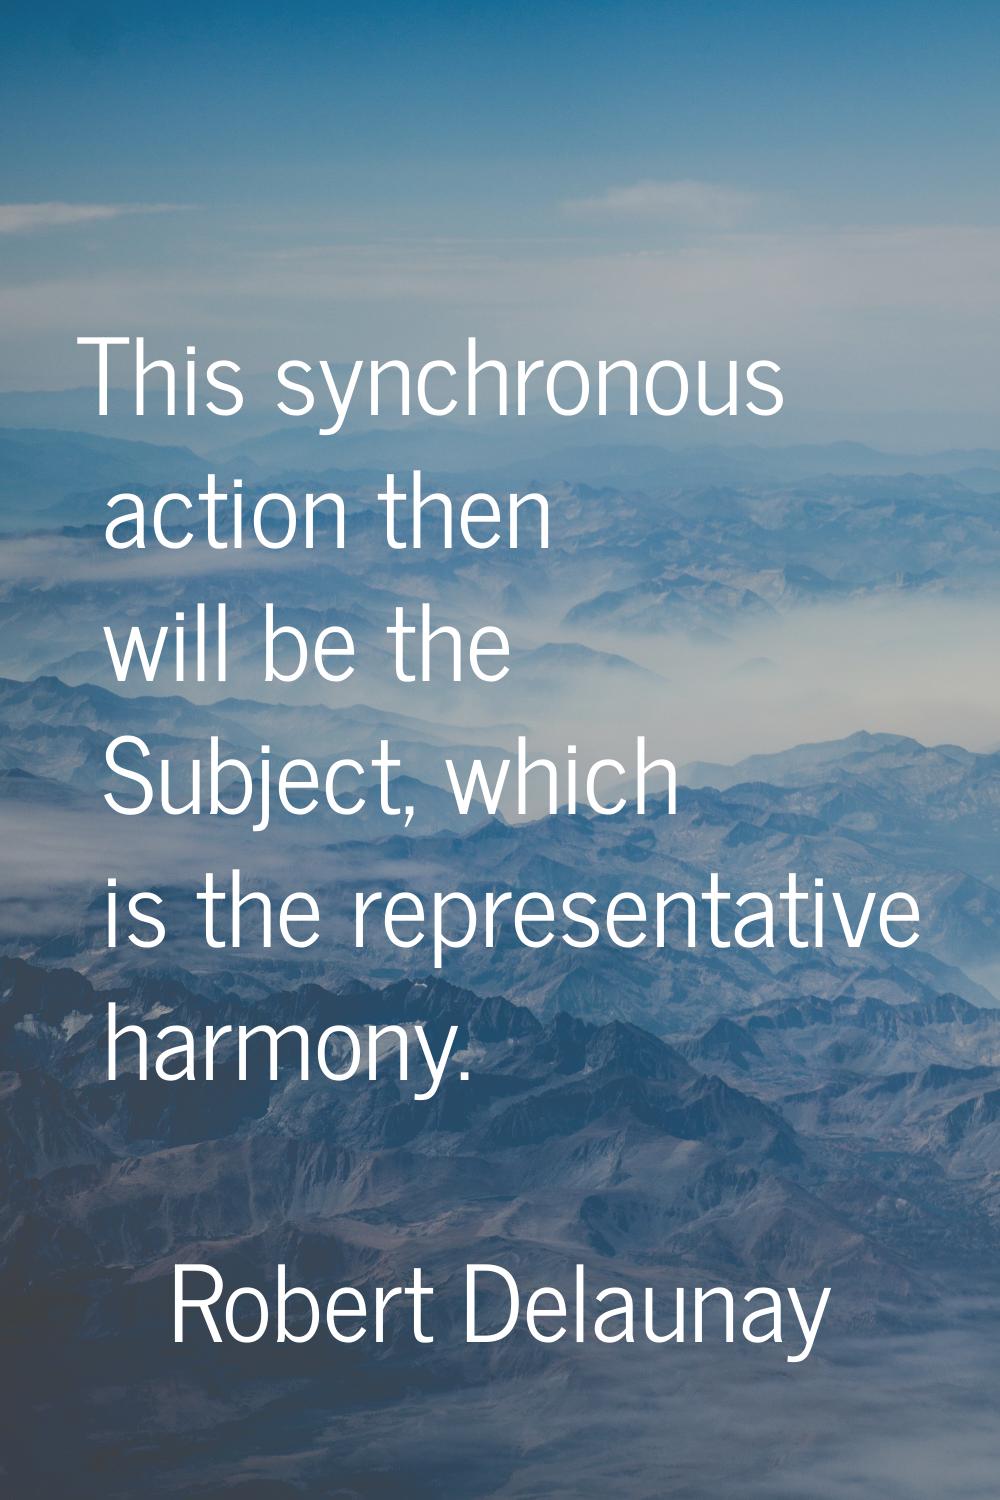 This synchronous action then will be the Subject, which is the representative harmony.